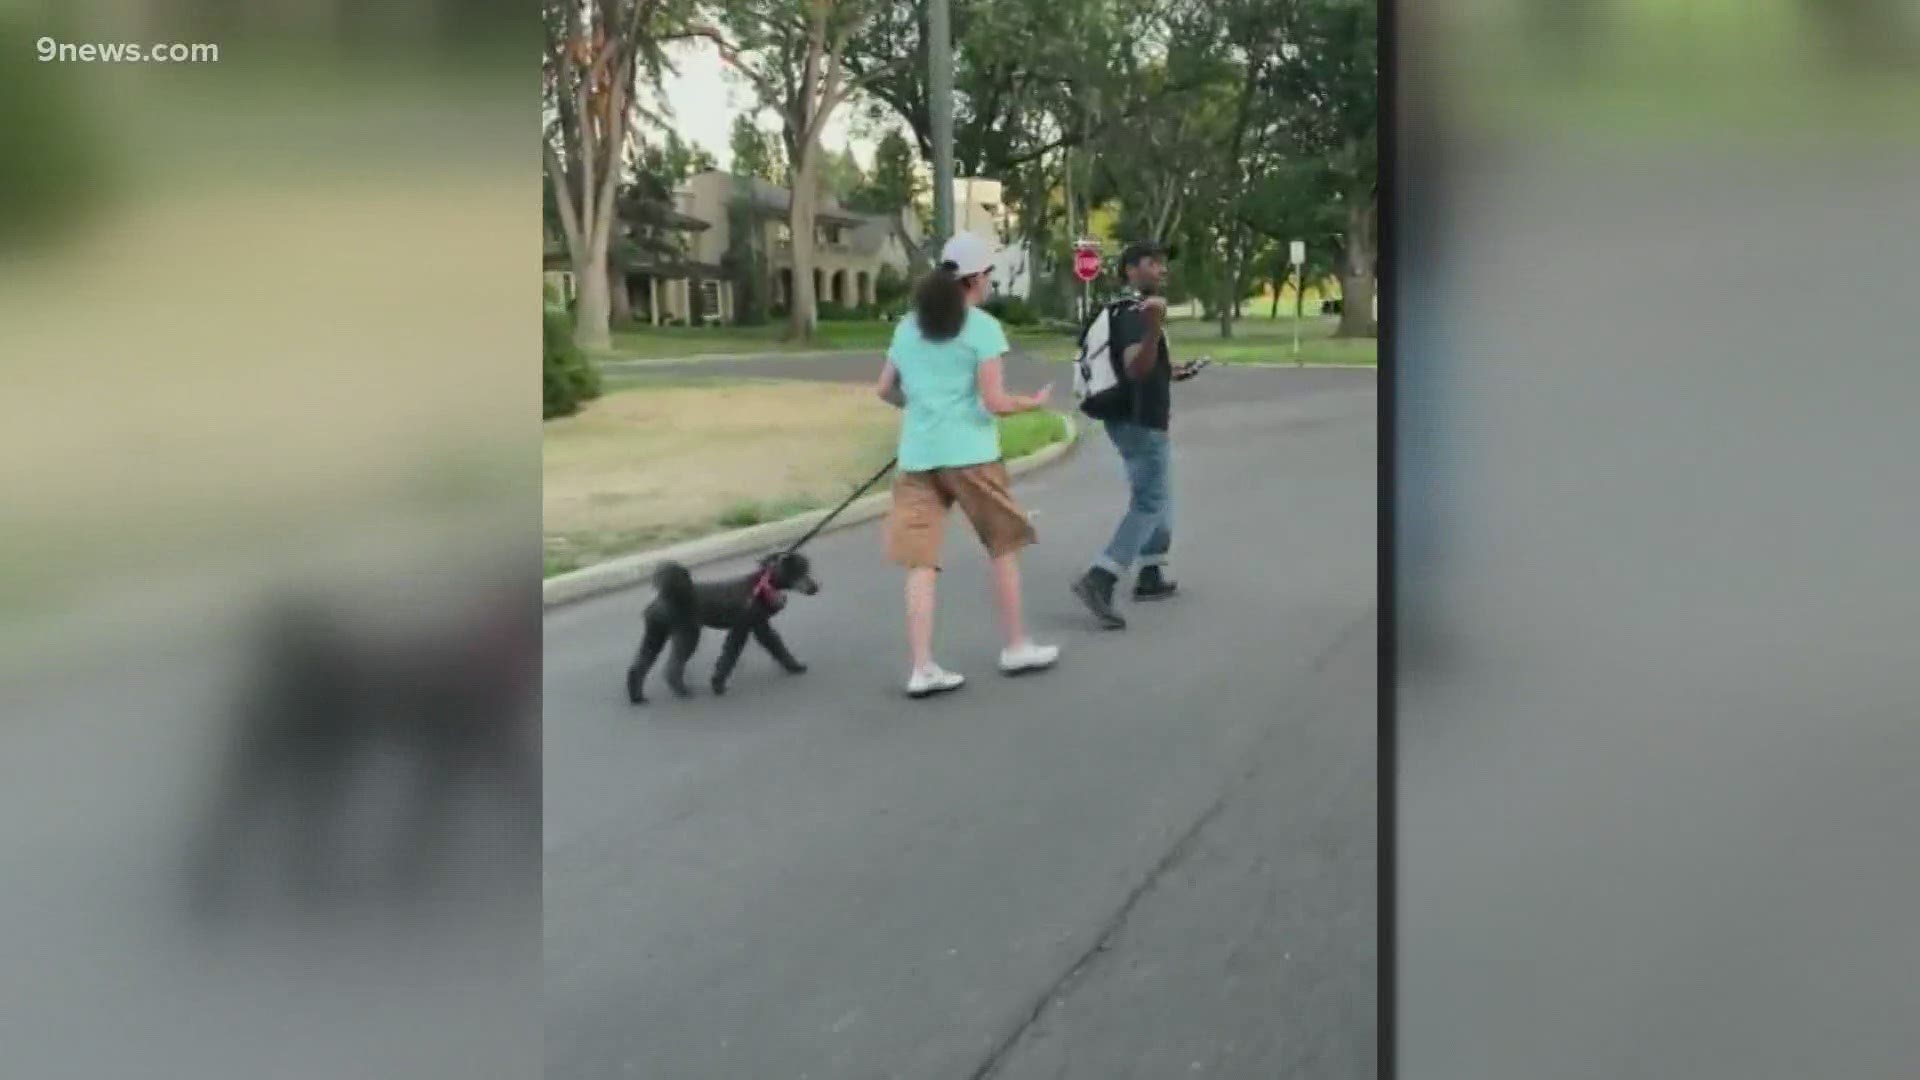 Protesters met in Denver's Hilltop neighborhood near Cranmer Park to snap photos after a now-viral video showed a woman telling a Black man to leave her neighborhood